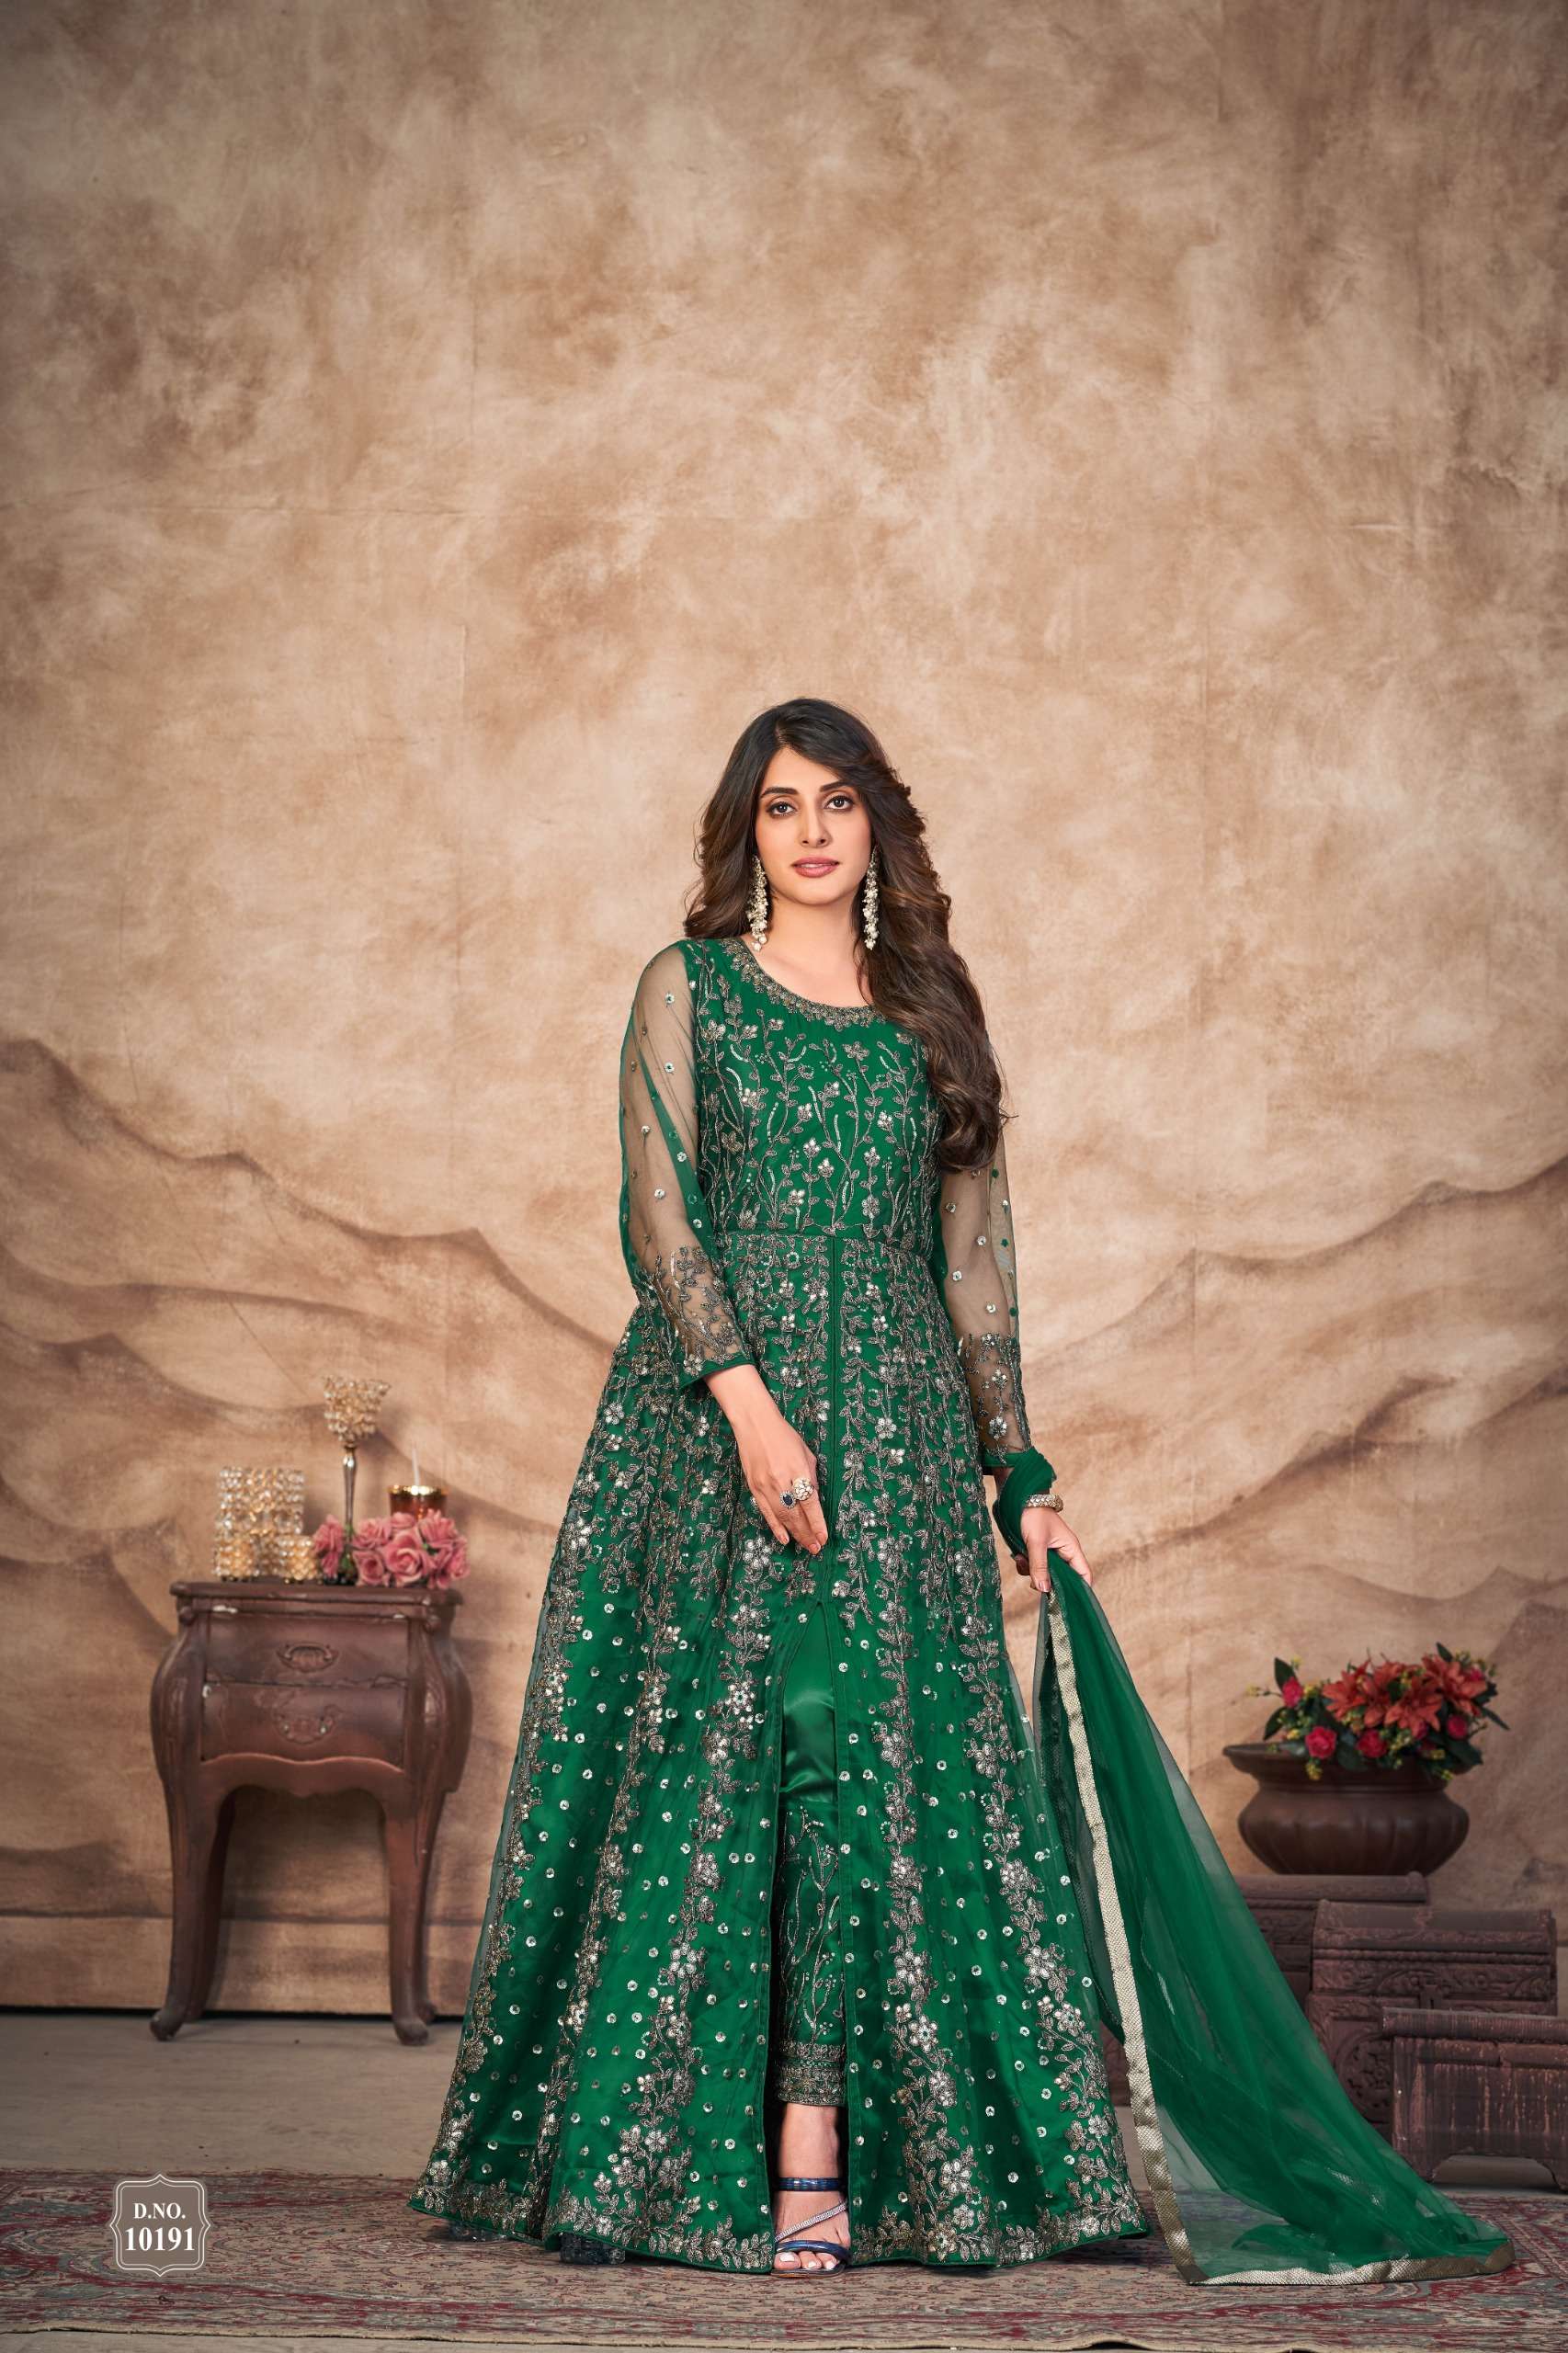 Green color party wear Border designer suit at Rs.1450/Piece in delhi offer  by Shri Chand Pardeep Kumar Private Limited